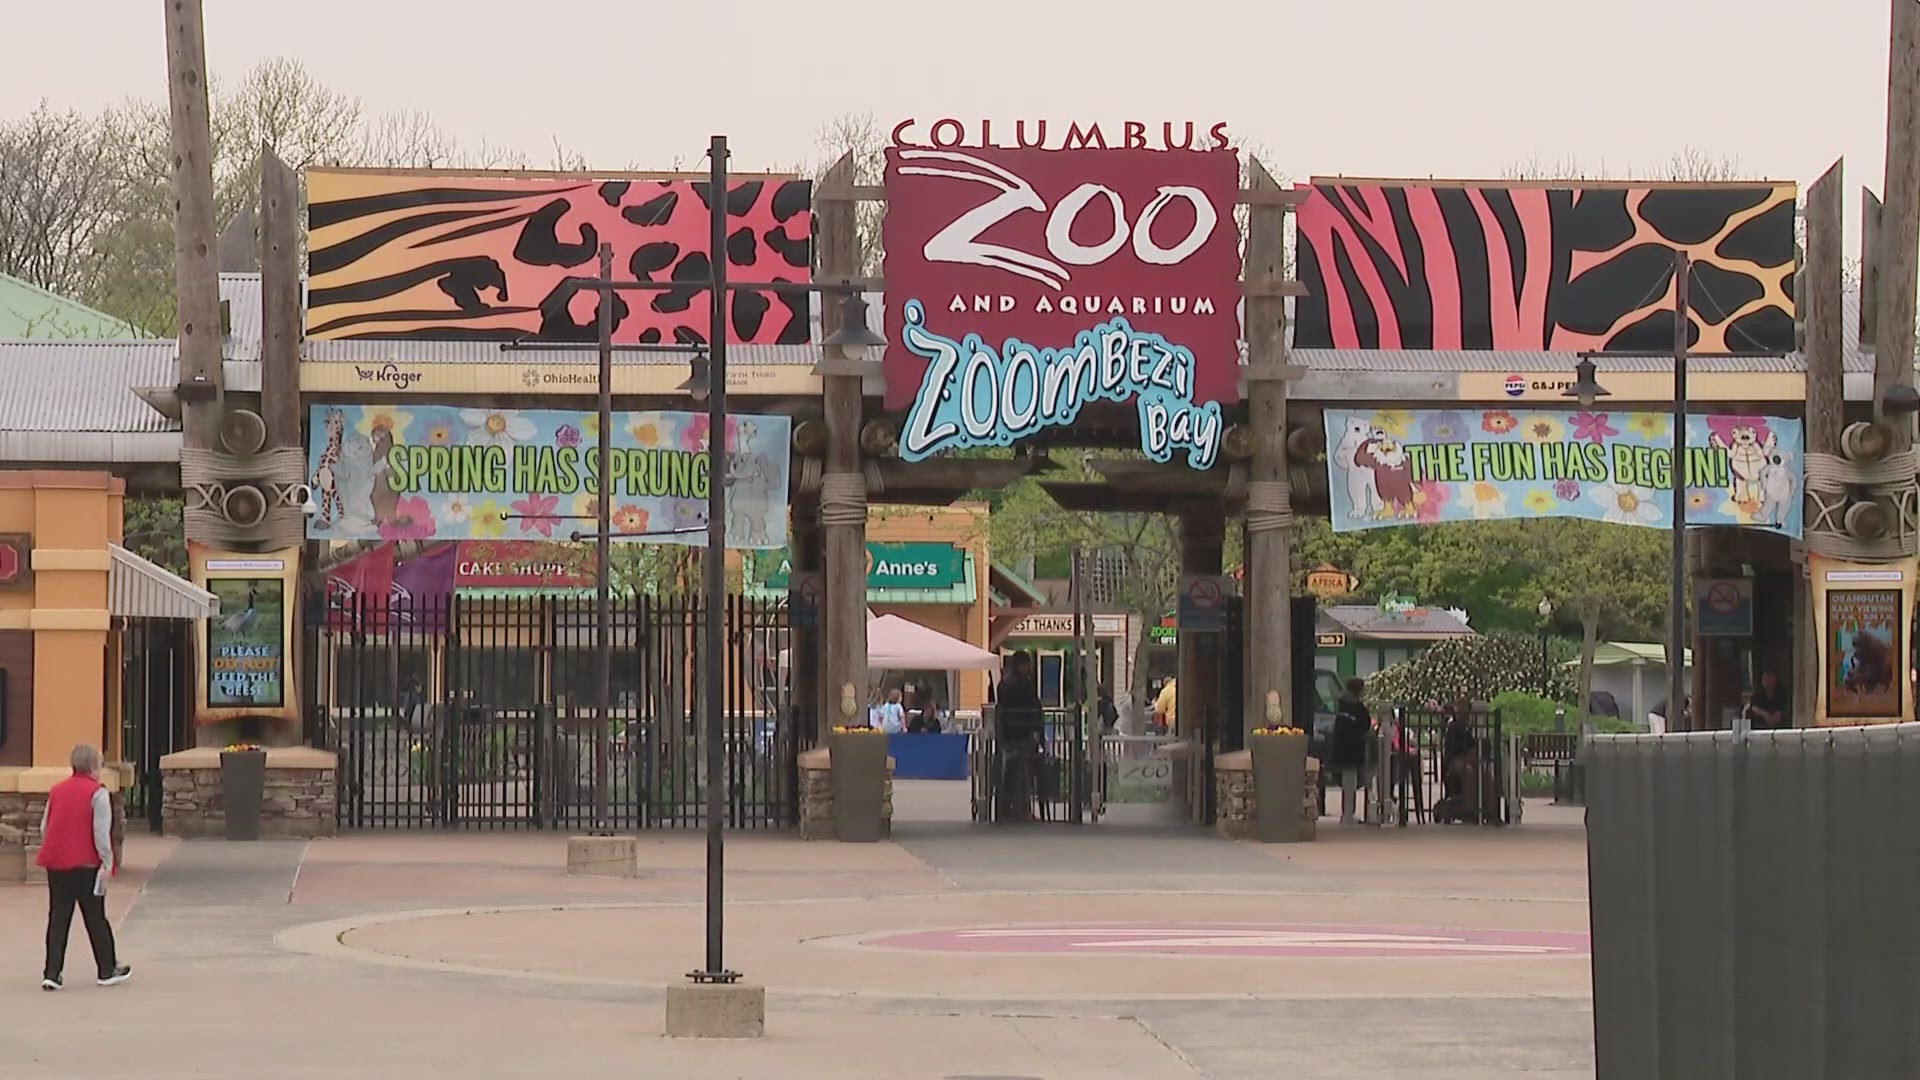 fter the zoo closed at 5 p.m., the stolen car was confirmed when a family was unable to find their car in the parking lot.